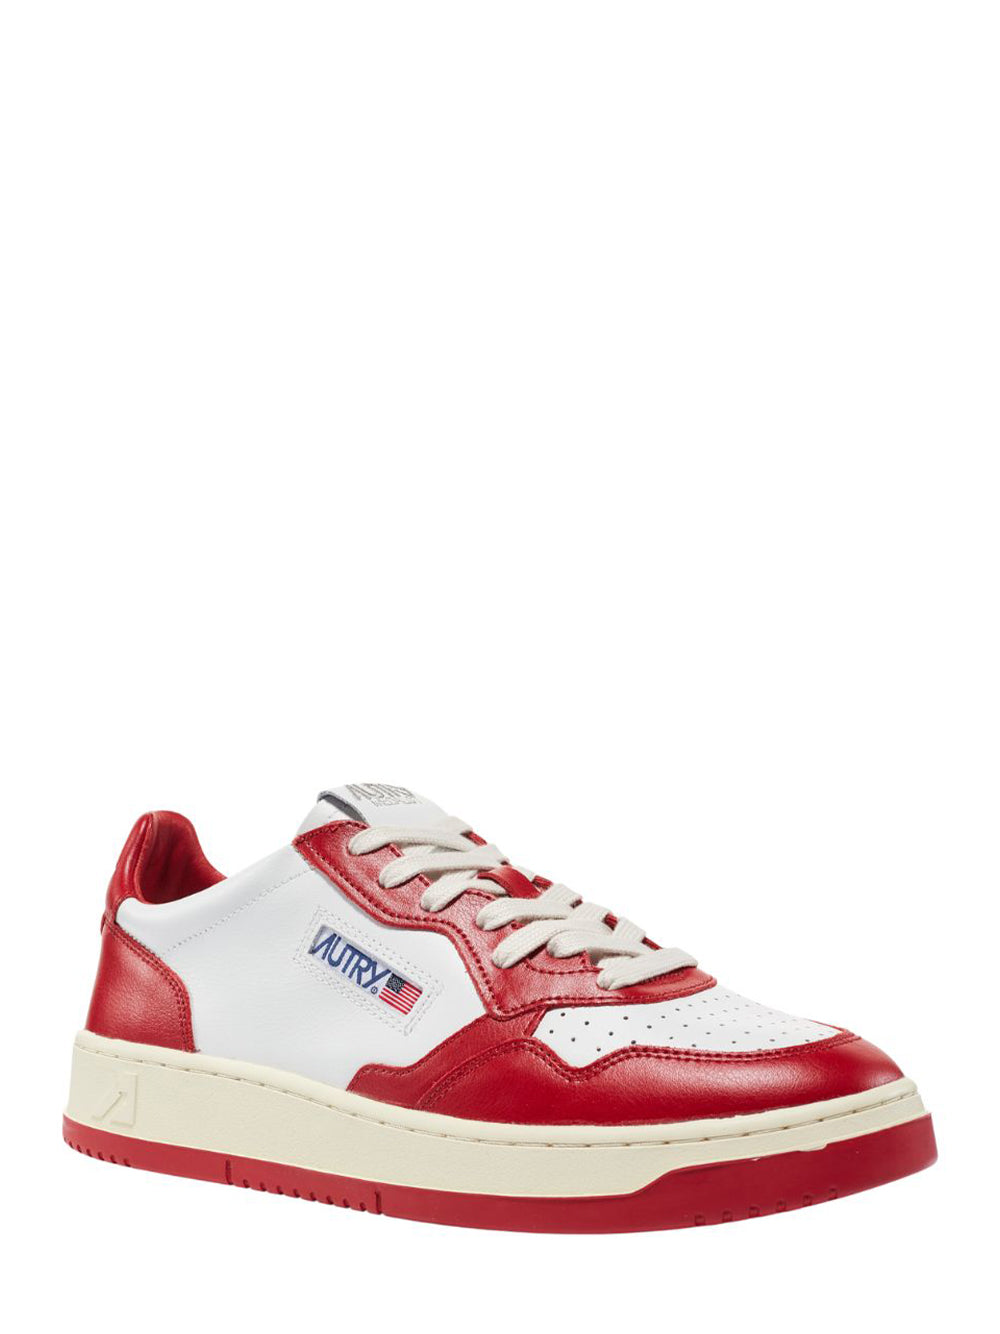 Medalist Low Sneakers In Two-Tone Leather (White And Red) (Women)